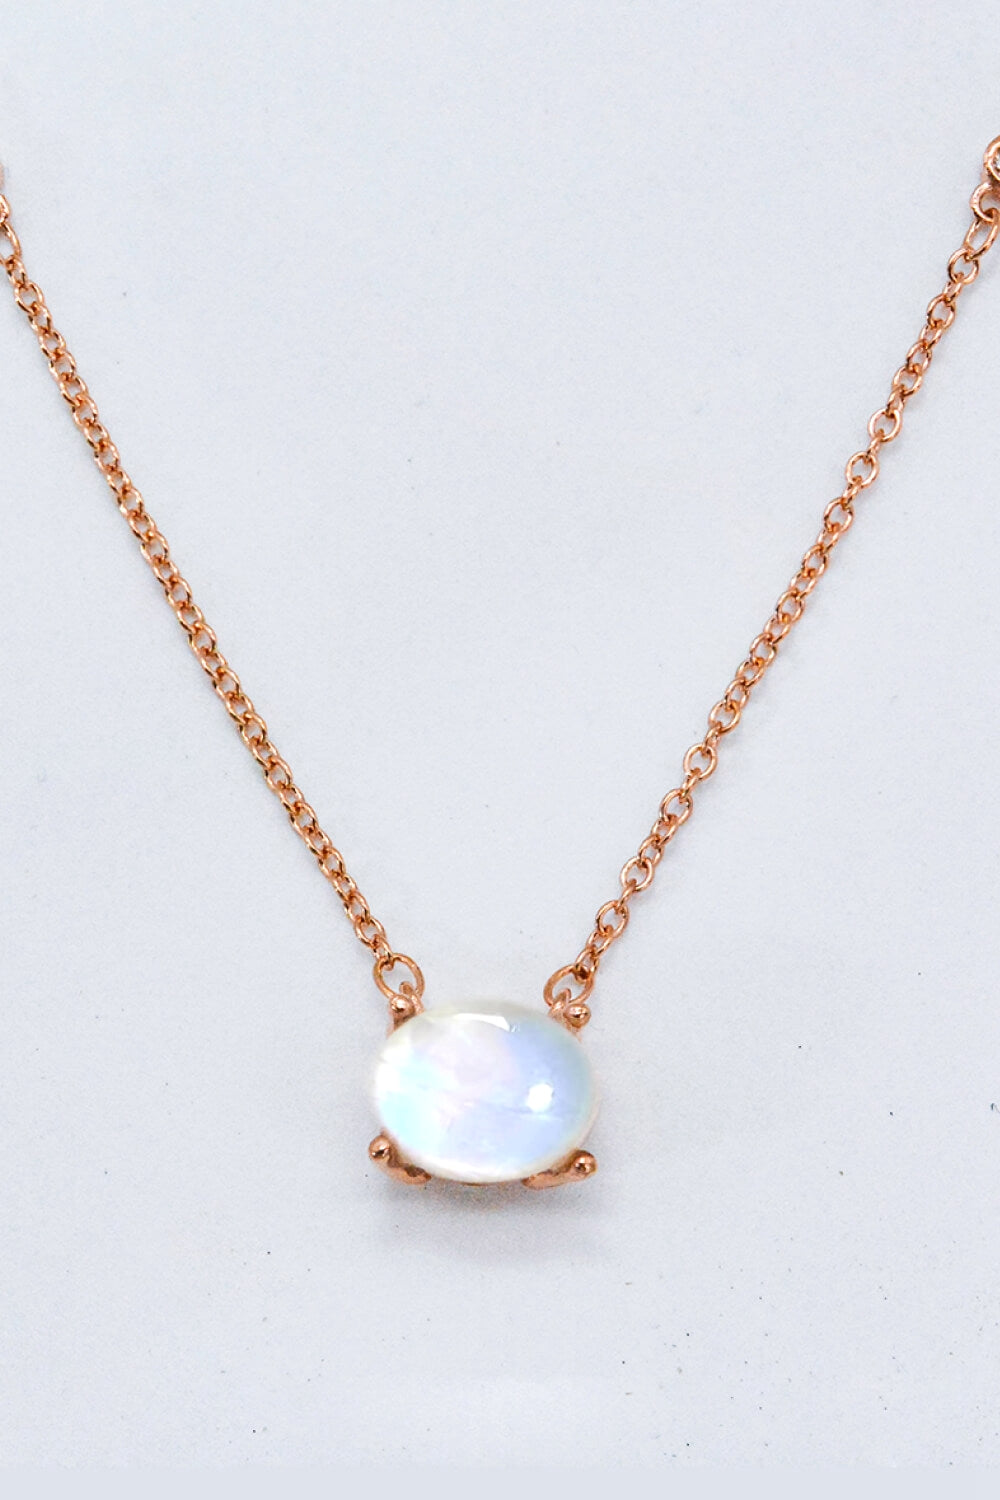 Geometric Moonstone Pendant Necklace - Tophatter Shopping Deals